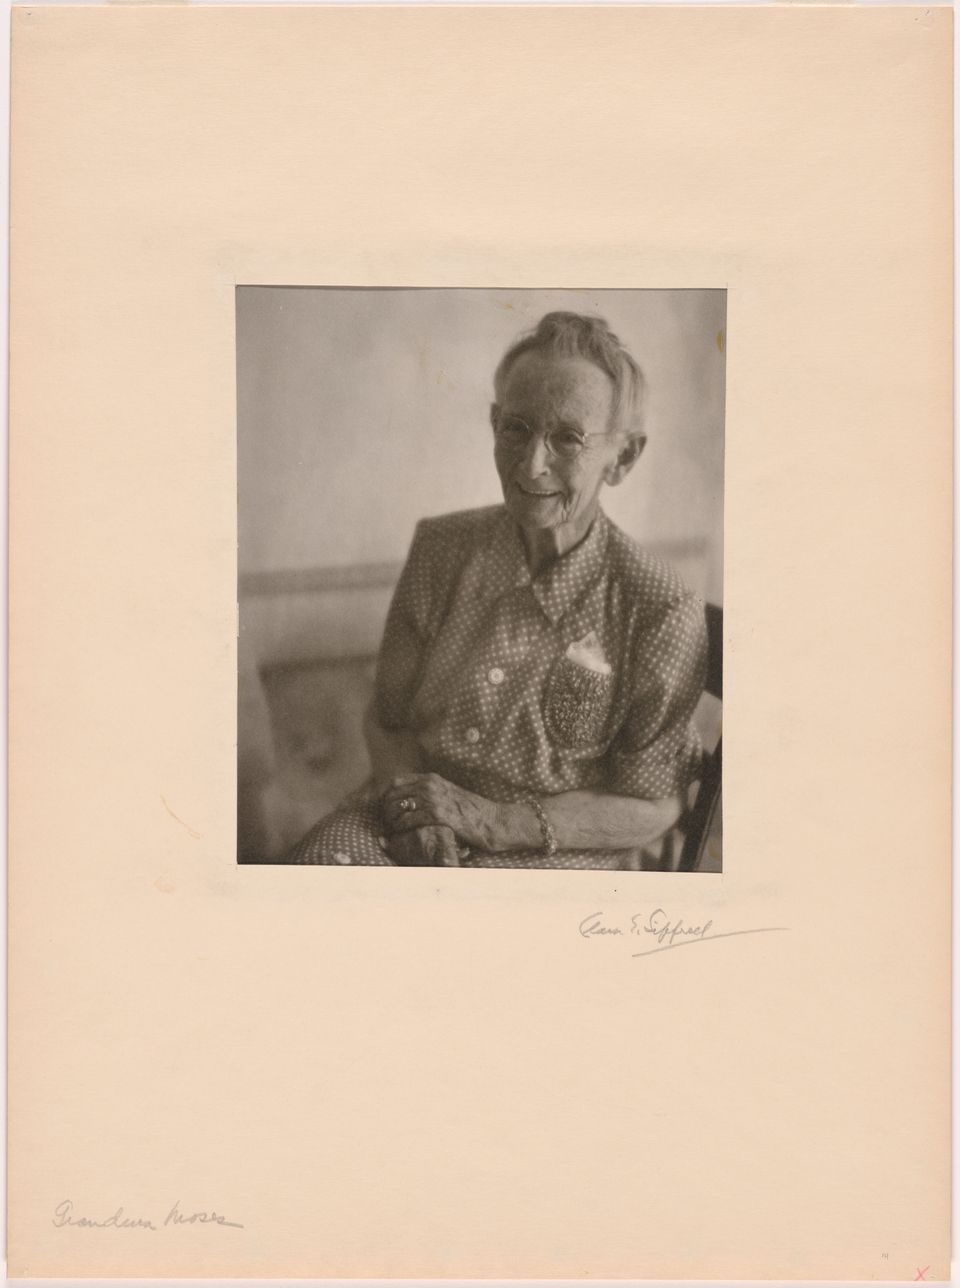 Grandma Moses sits posing in a chair